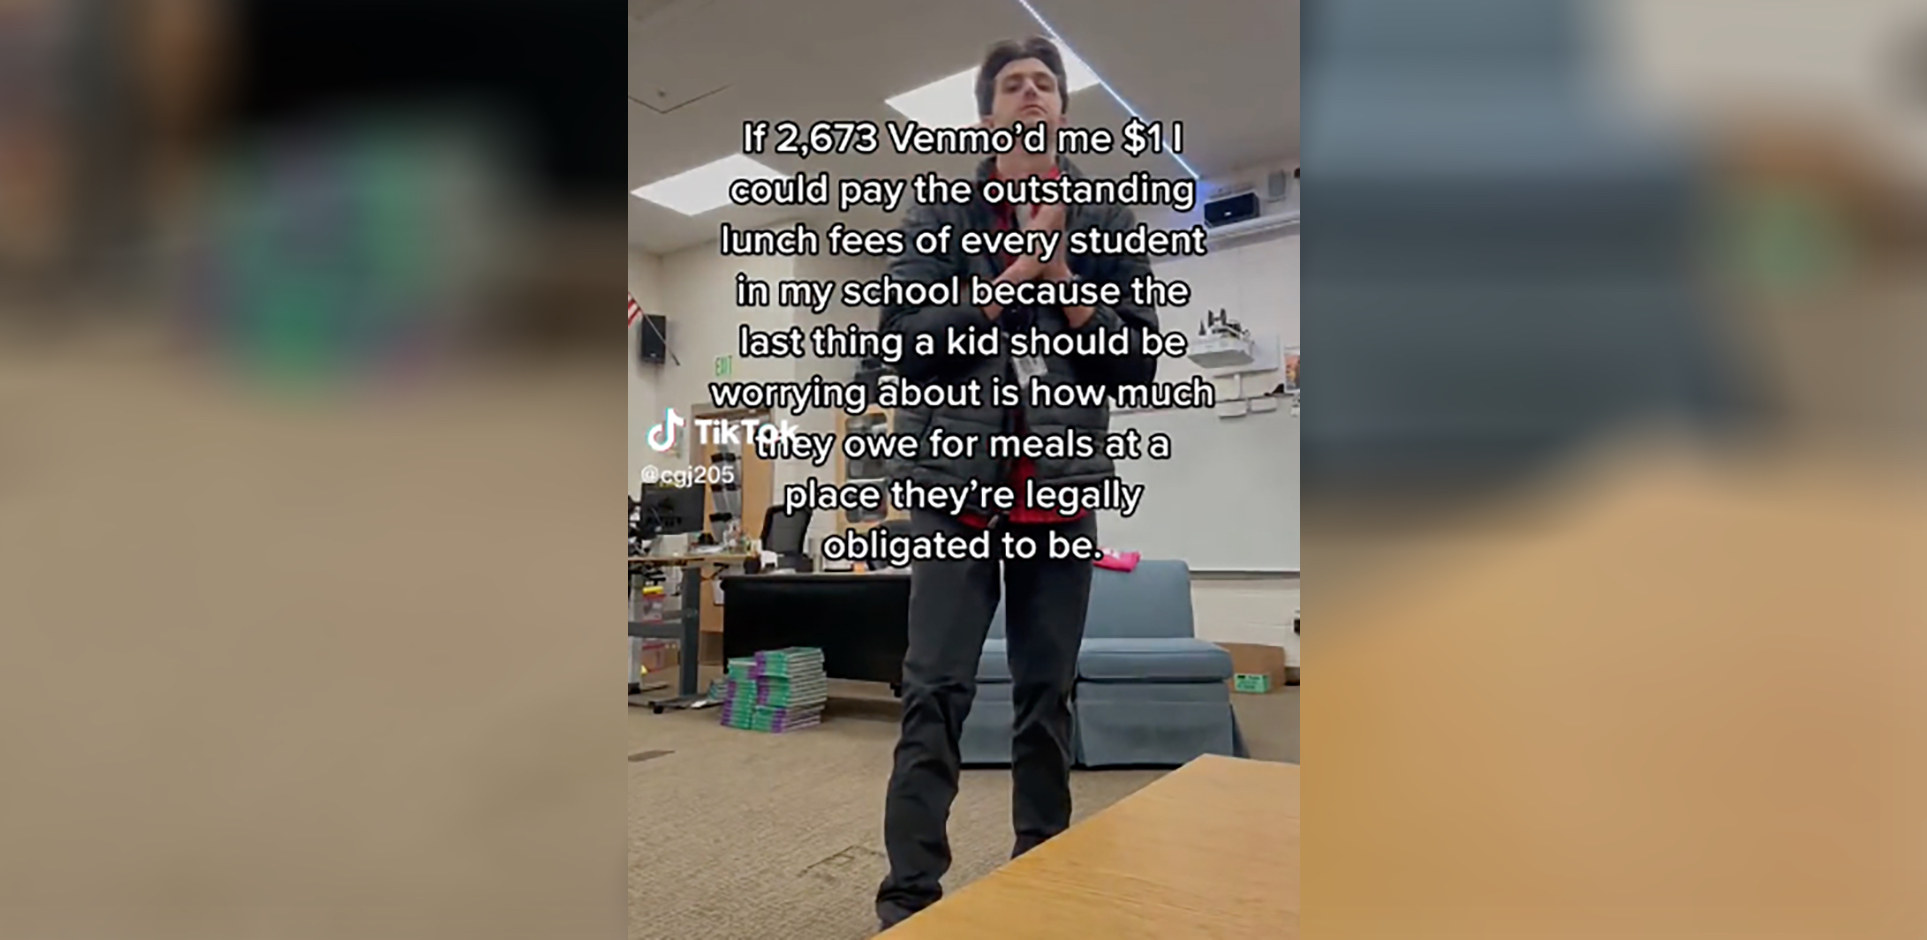 PHOTO: Garrett Jones, a middle school teacher in Utah, shared a TikTok post about school lunch debt. The post has since gone viral and helped raise over $30,000 for students' outstanding balances.